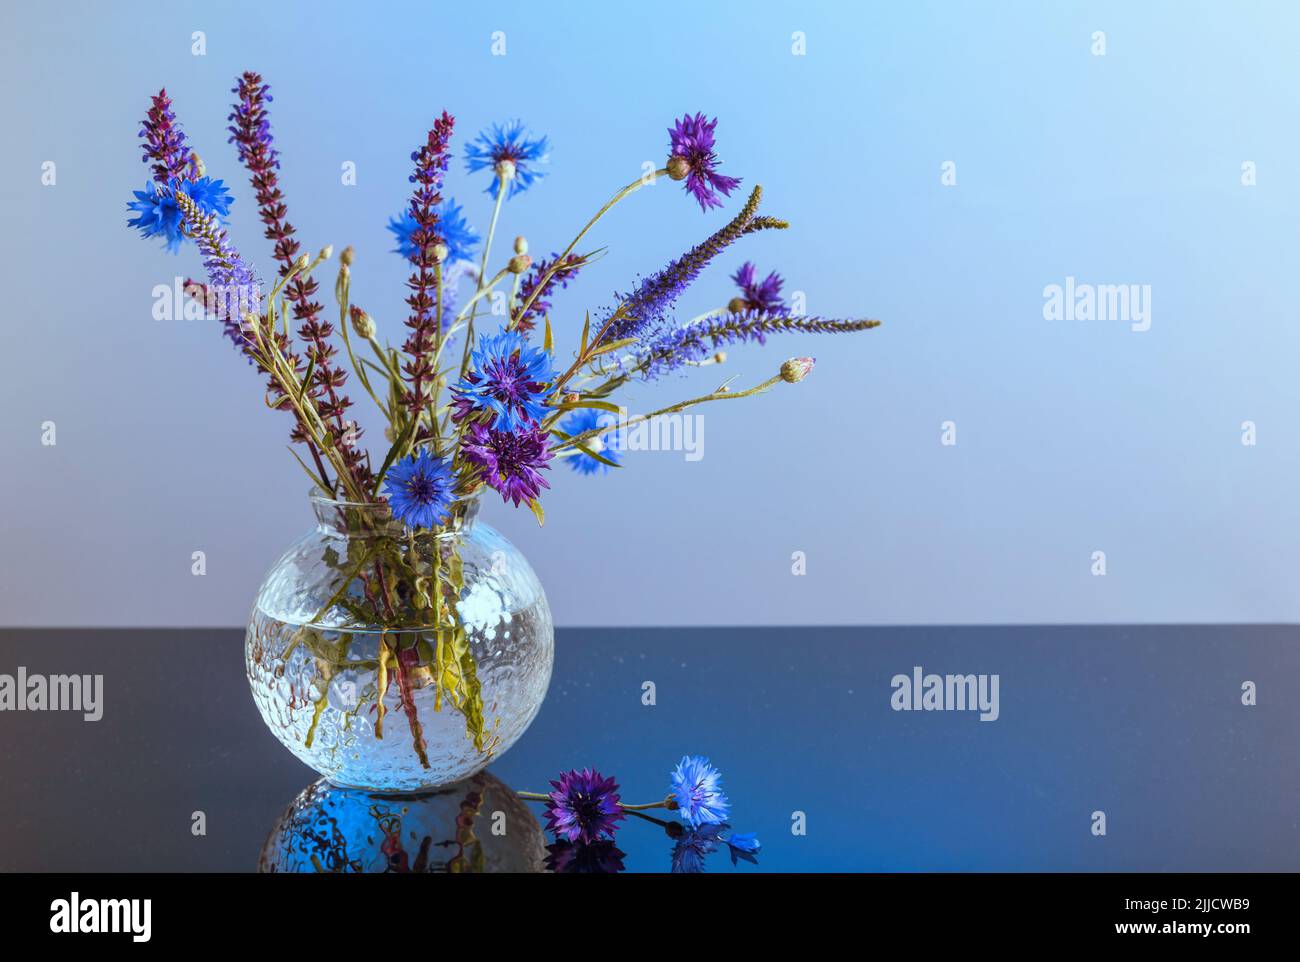 Minimalist photo of blue and purple cornflower flowers with wild herbs in bouquet on table on blue background Stock Photo